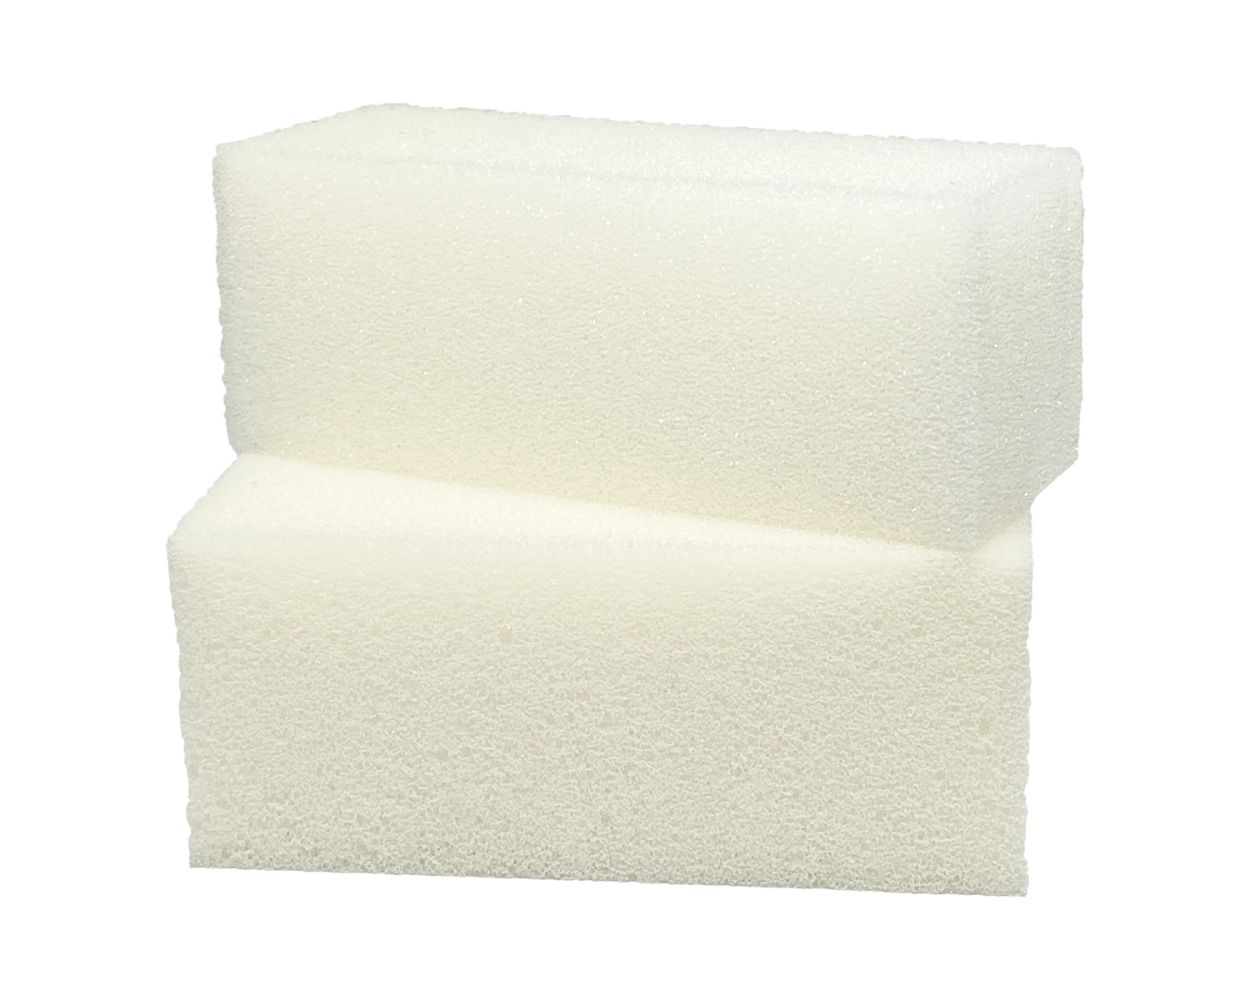 Leather Master Application Sponge Small - 1 Each